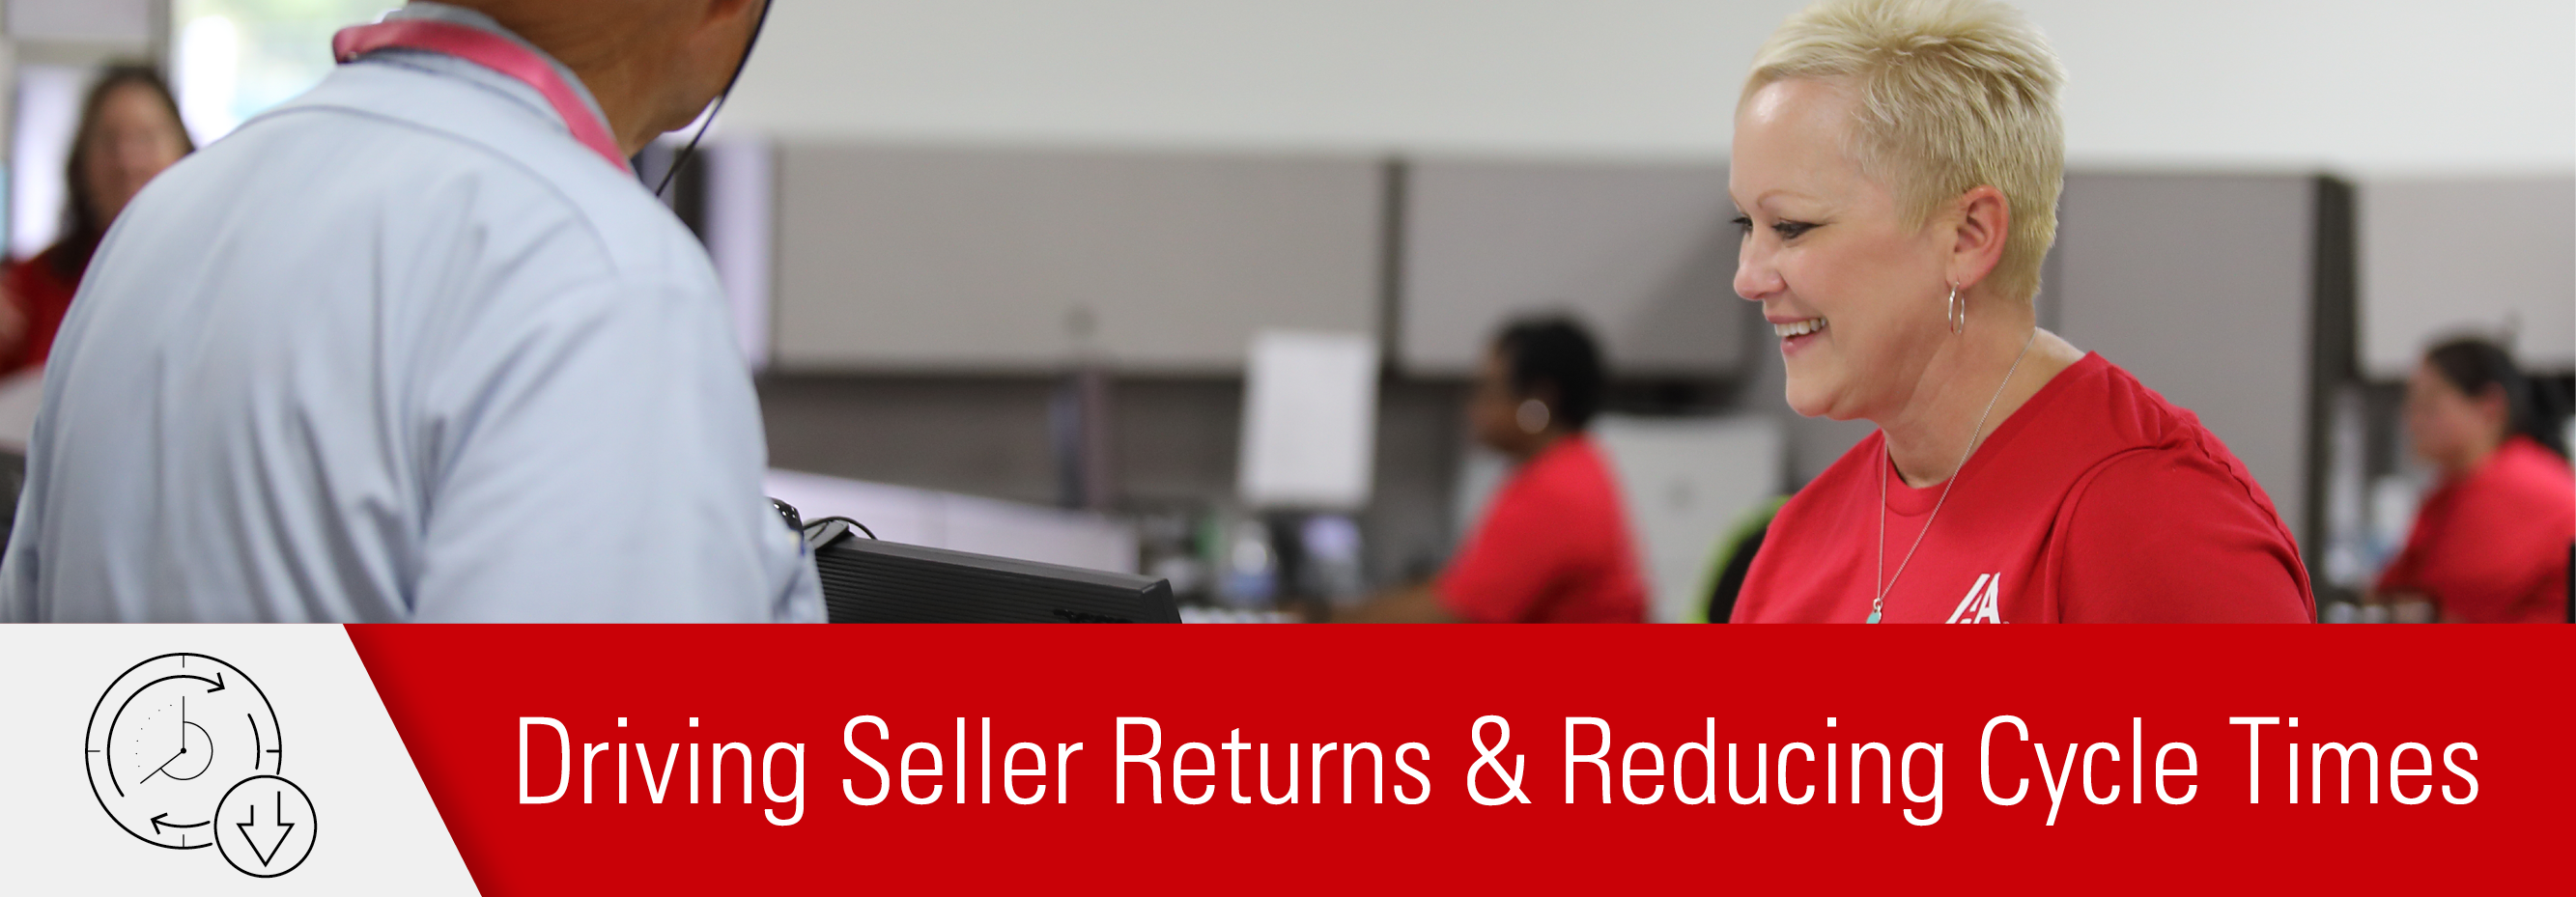 Driving Seller Returns & Reducing Cycle Times